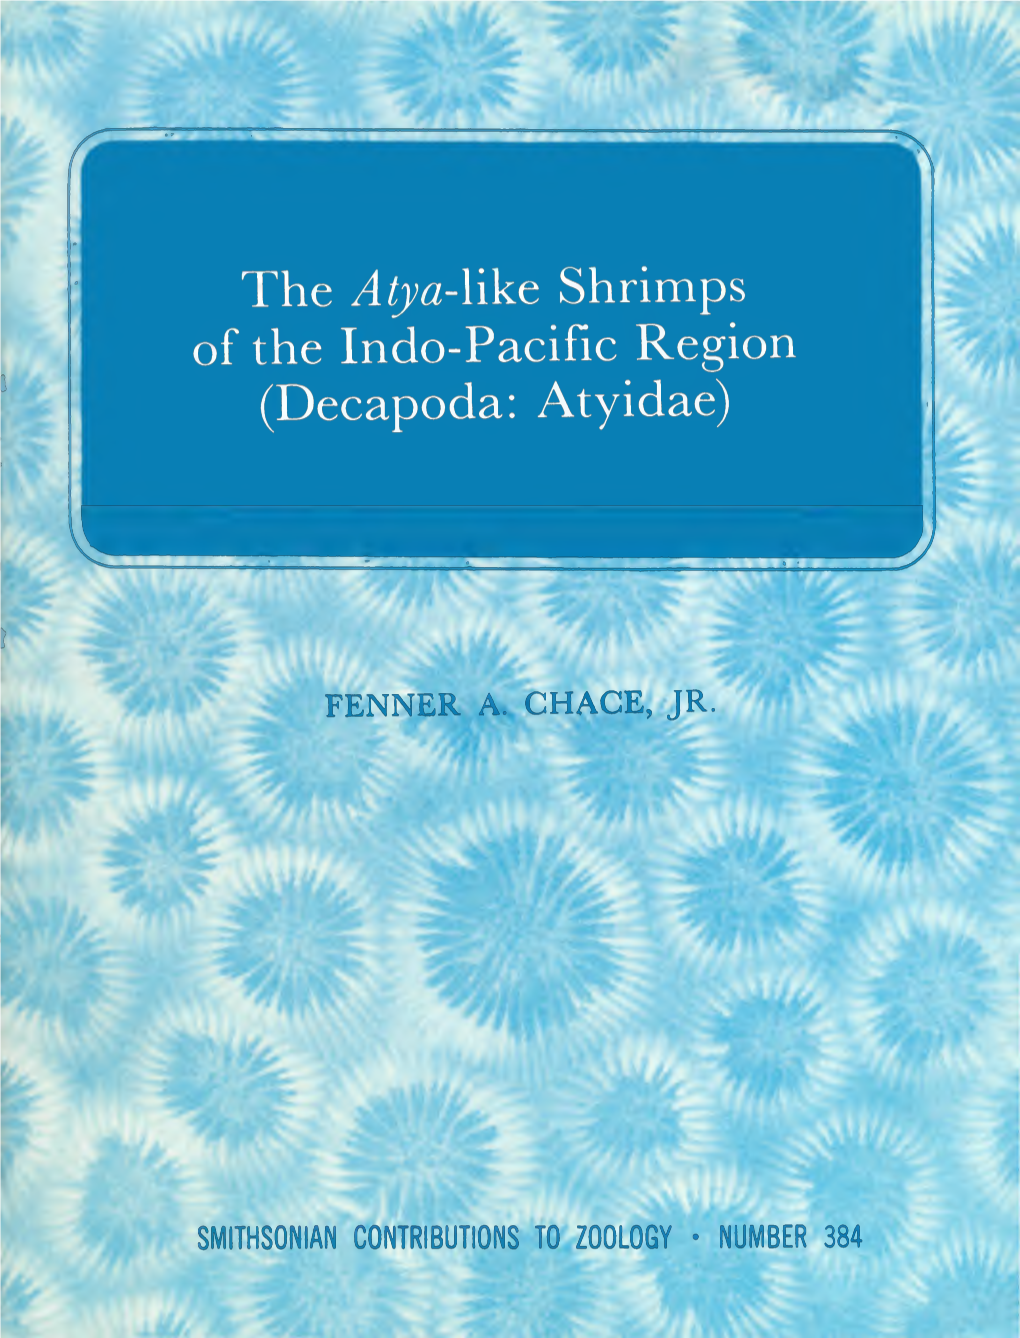 Of the Indo-Pacific Region (Decapoda: Atyidae)